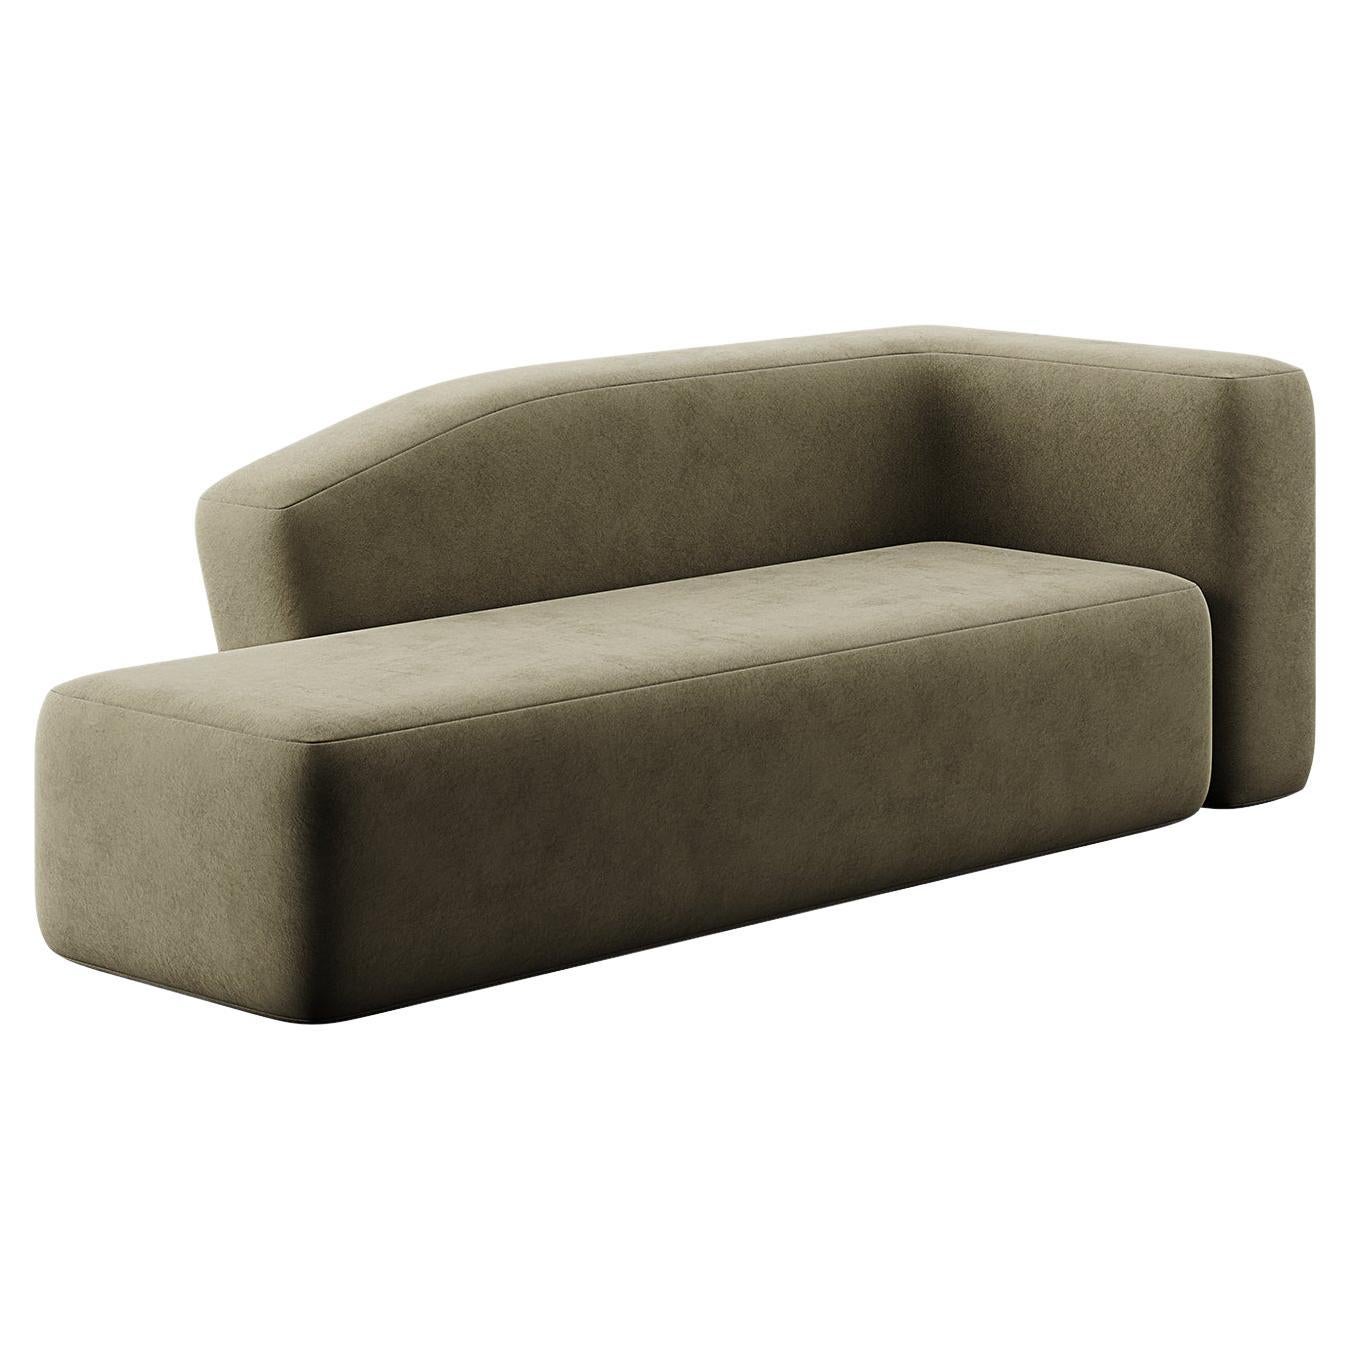 Contemporary Customizable Upholstered Chaise Longue Sofa Green Forest Velvet For Sale